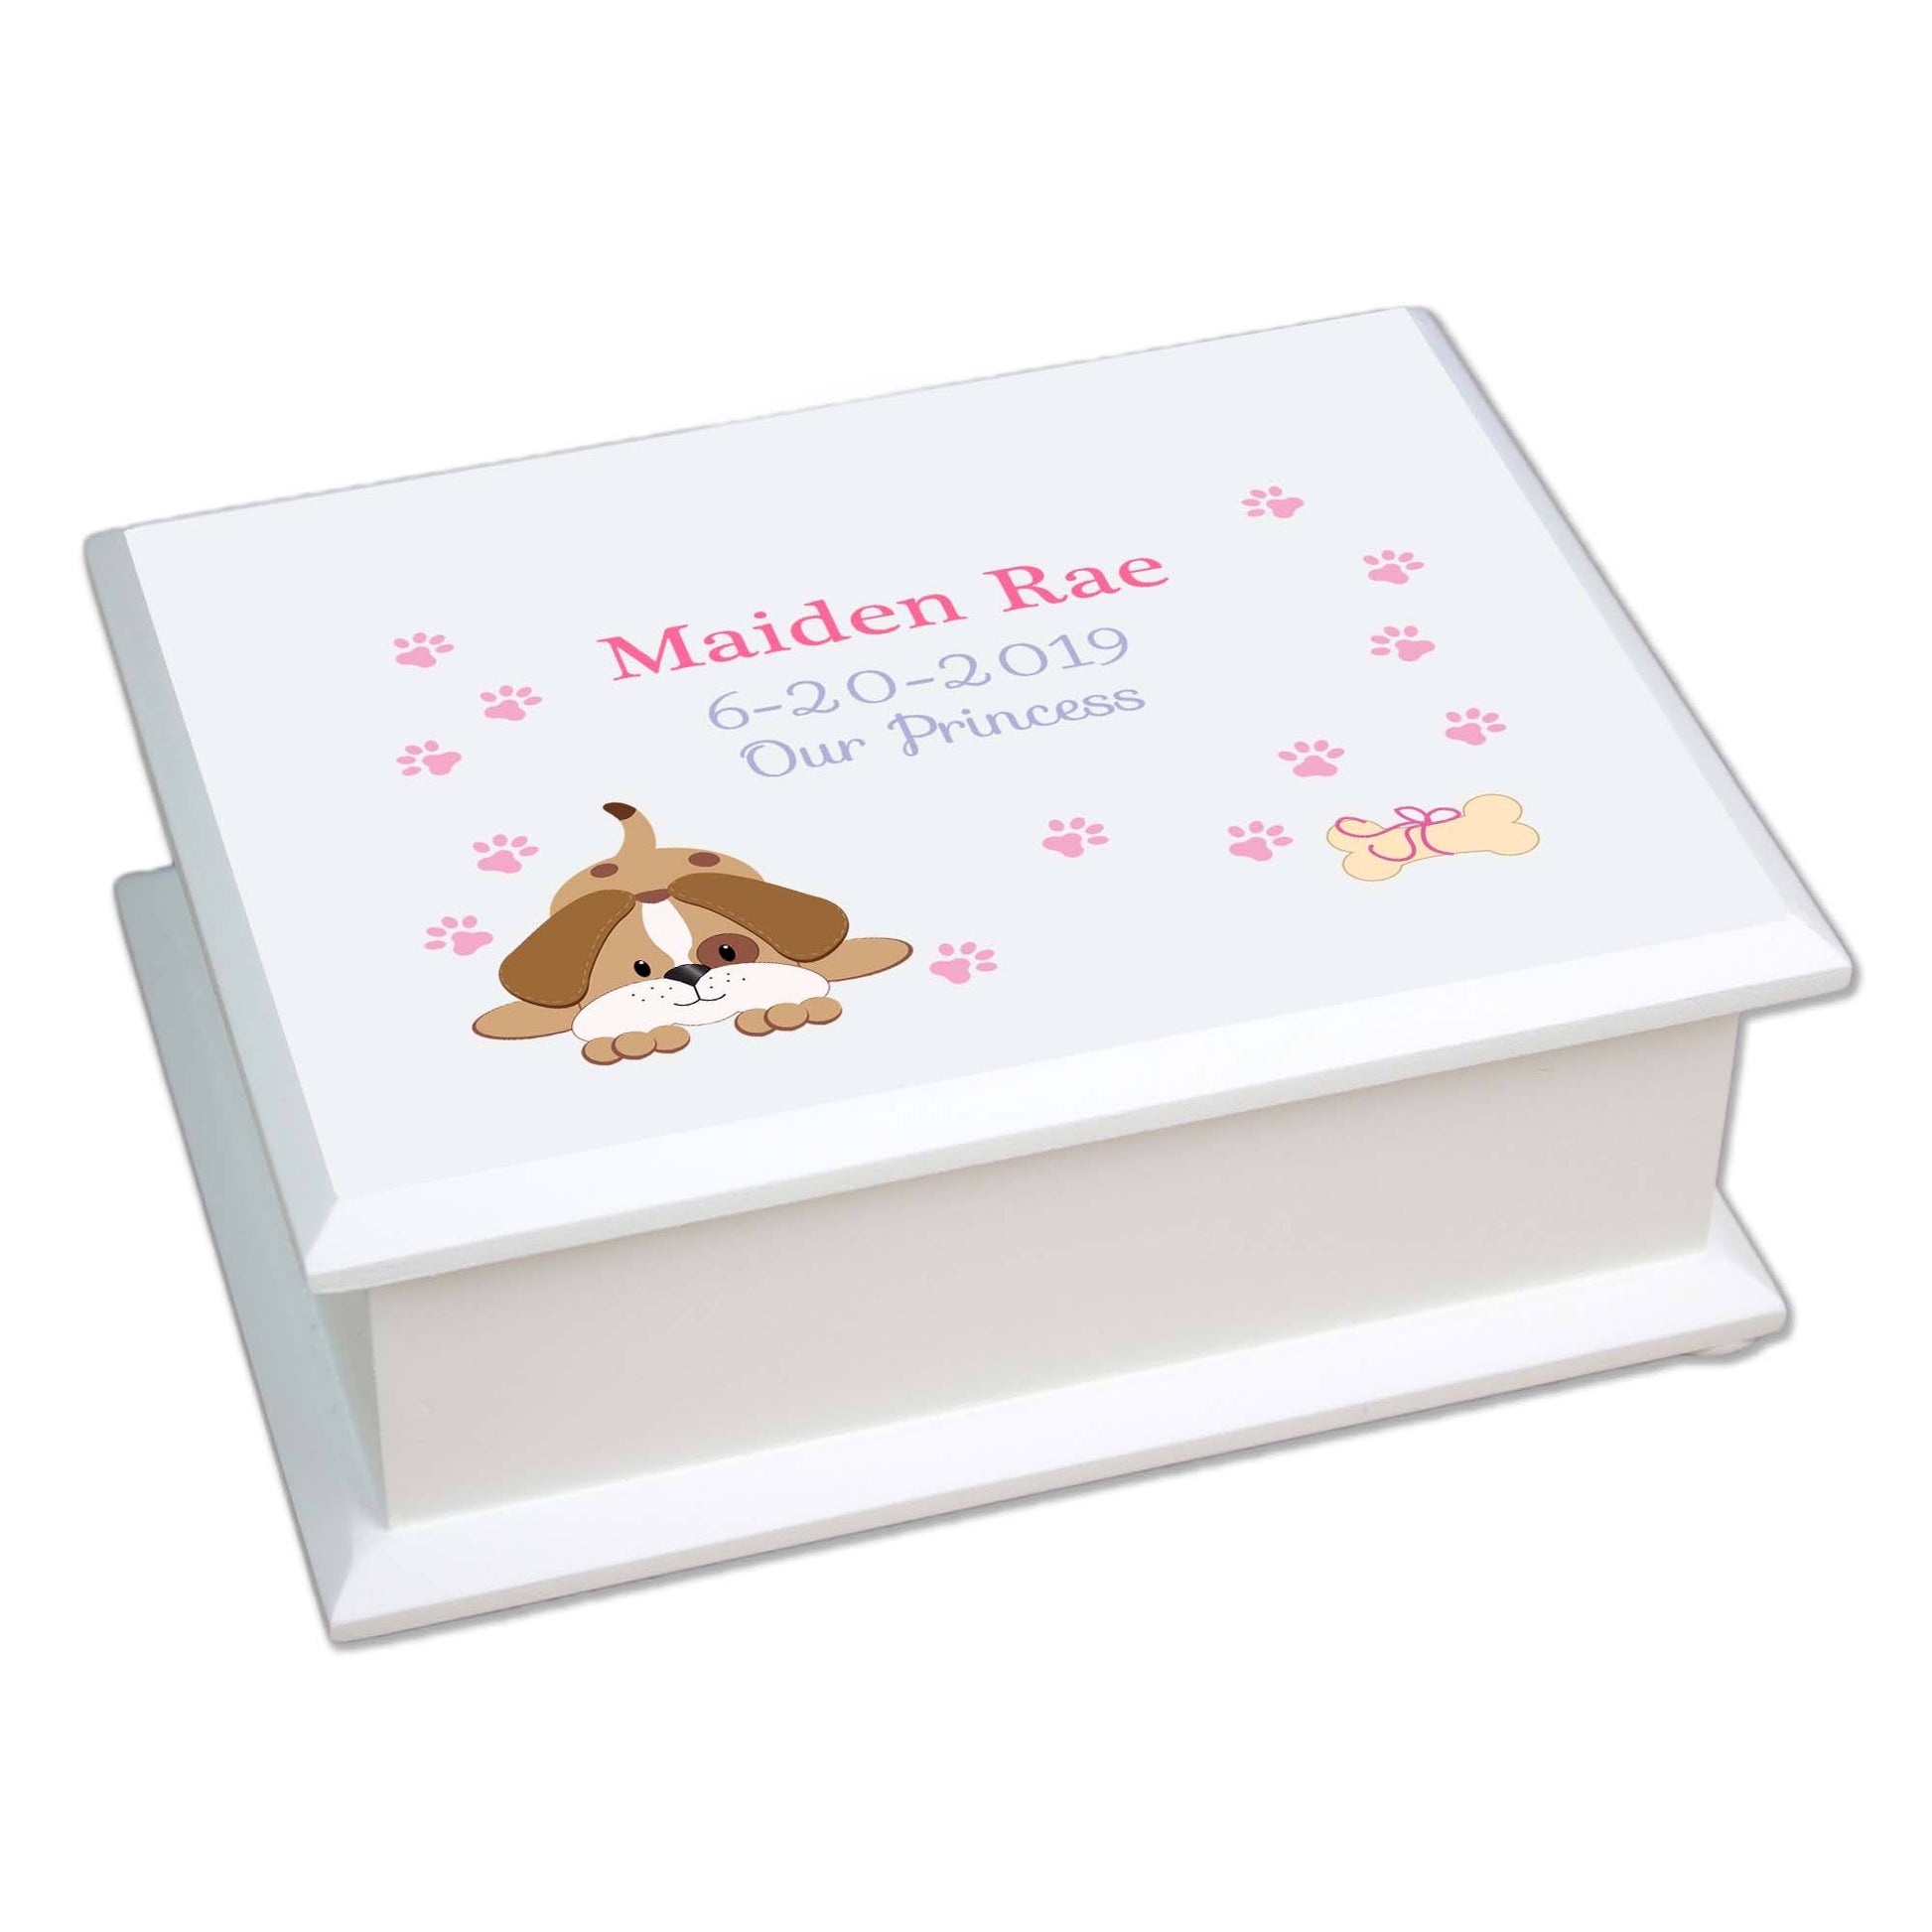 Personalized Lift Top Jewelry Box with Pink Puppy design